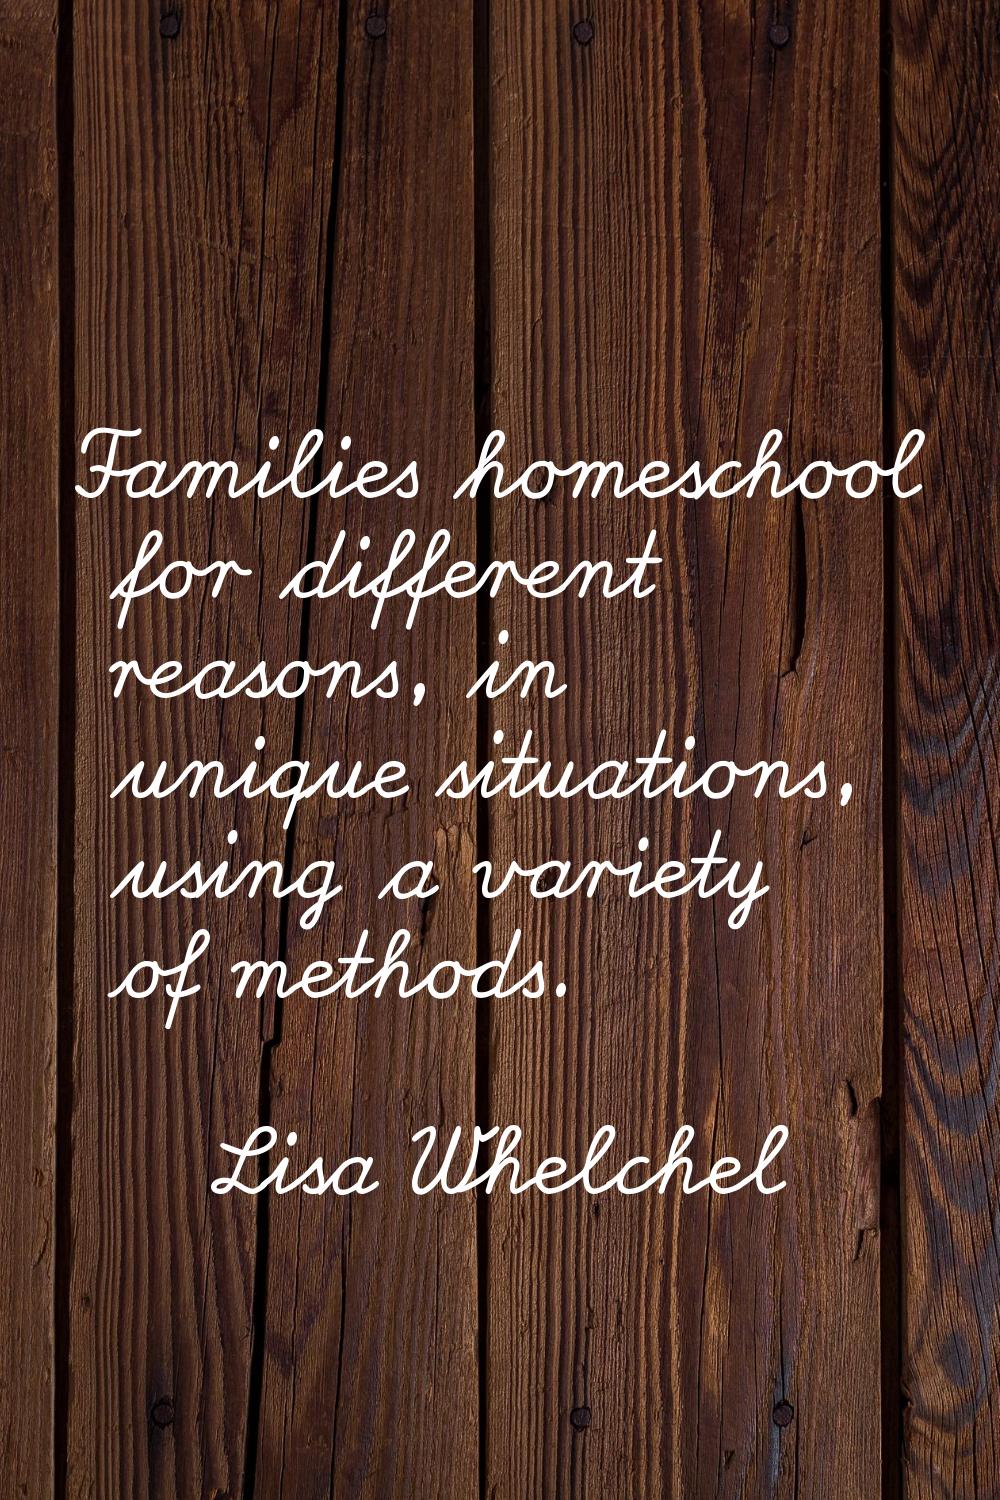 Families homeschool for different reasons, in unique situations, using a variety of methods.